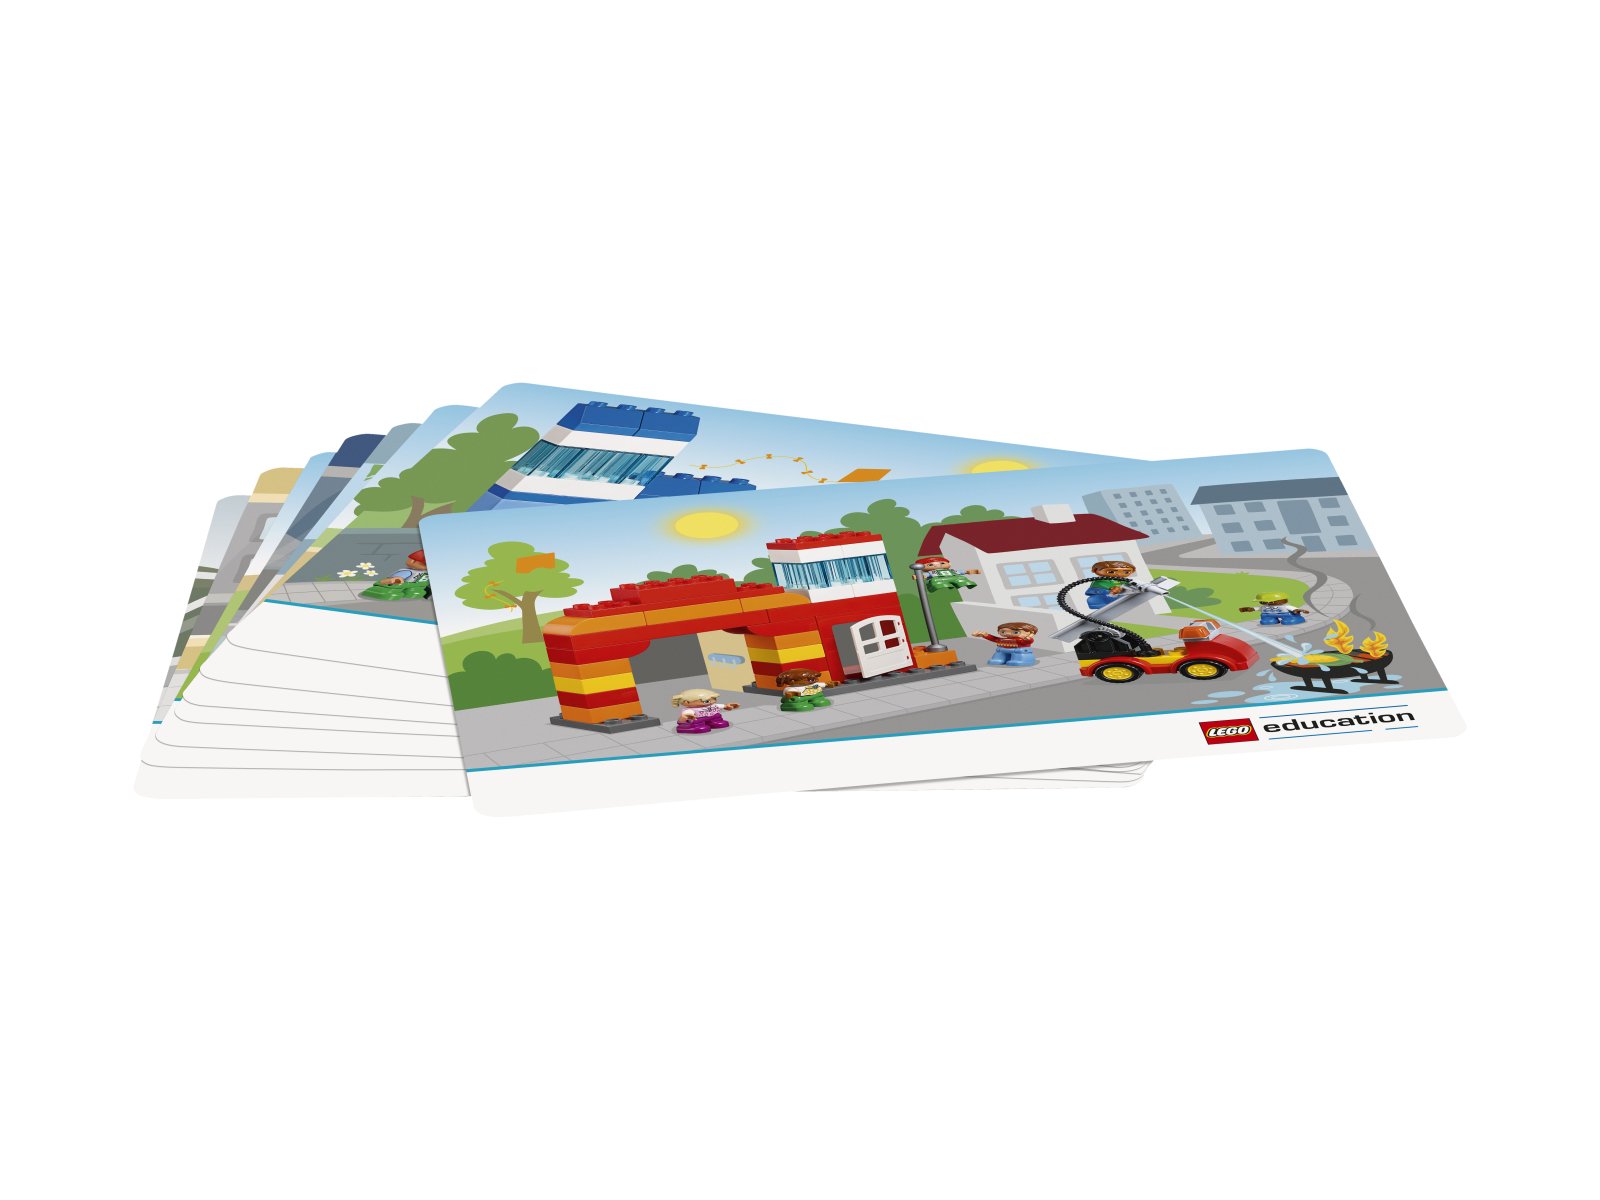 LEGO 45021 Education Our Town